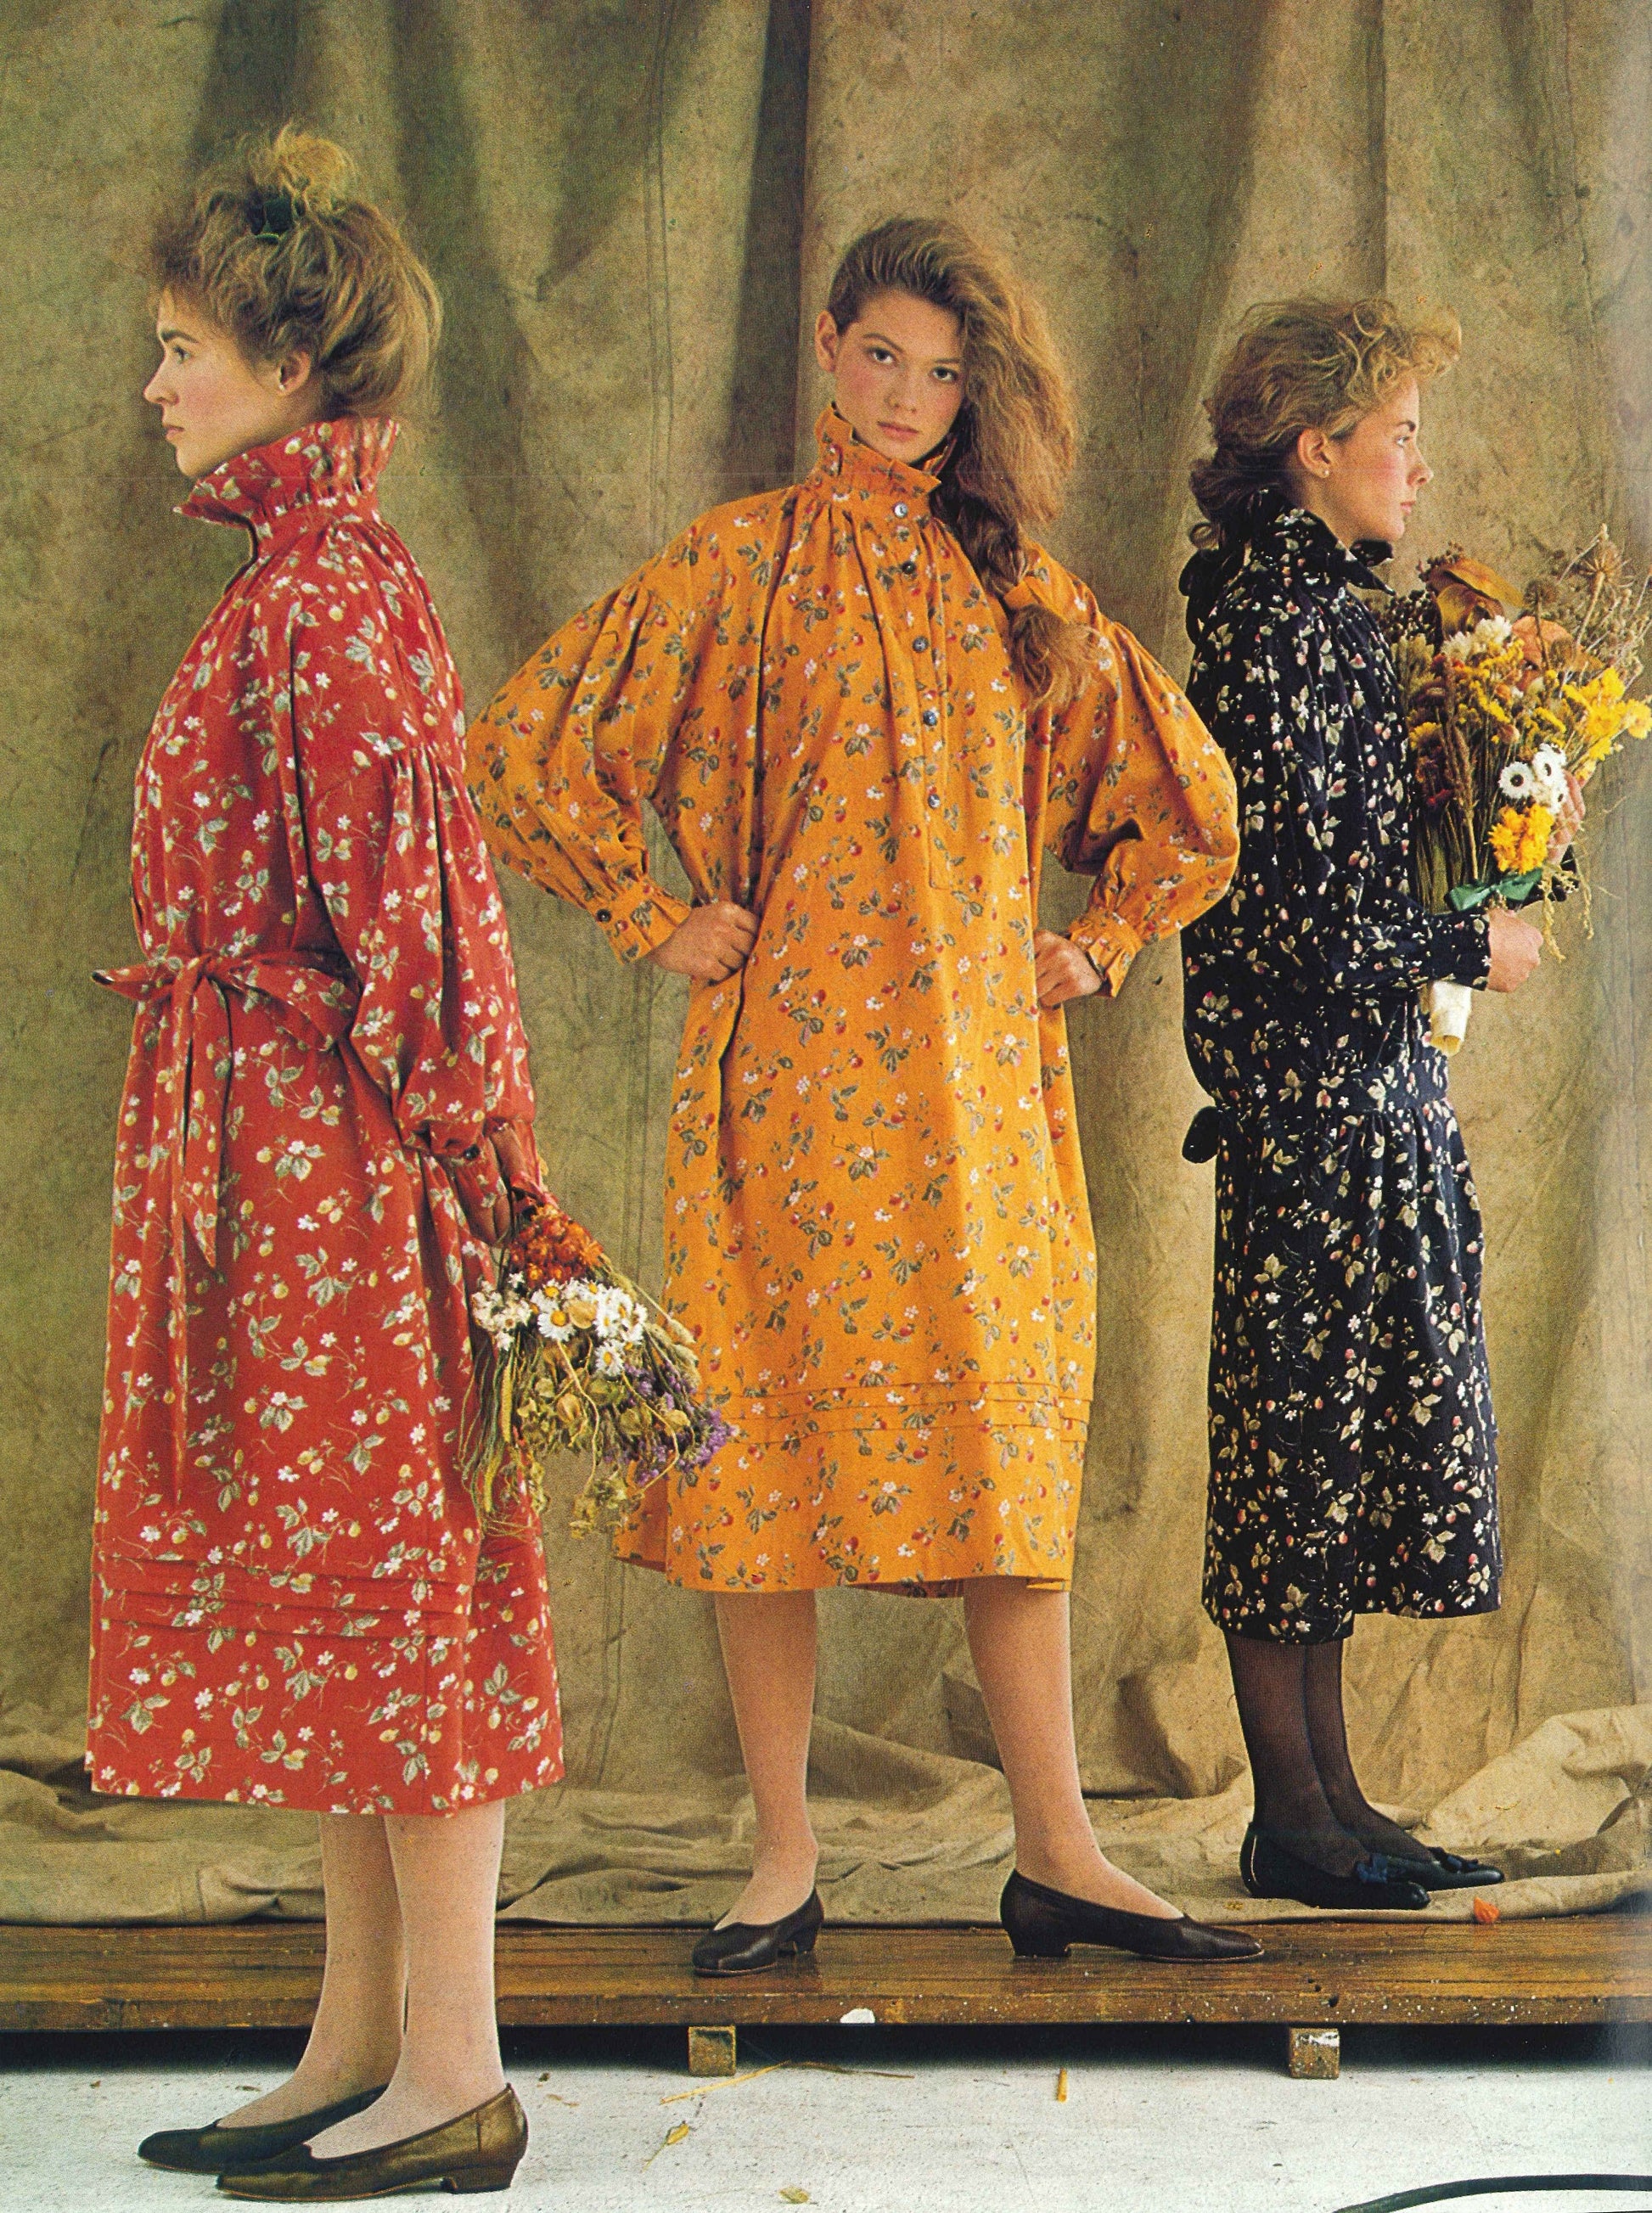 Colorful Laura Ashley High Neck Dress - Late 1970s / Early 1980s